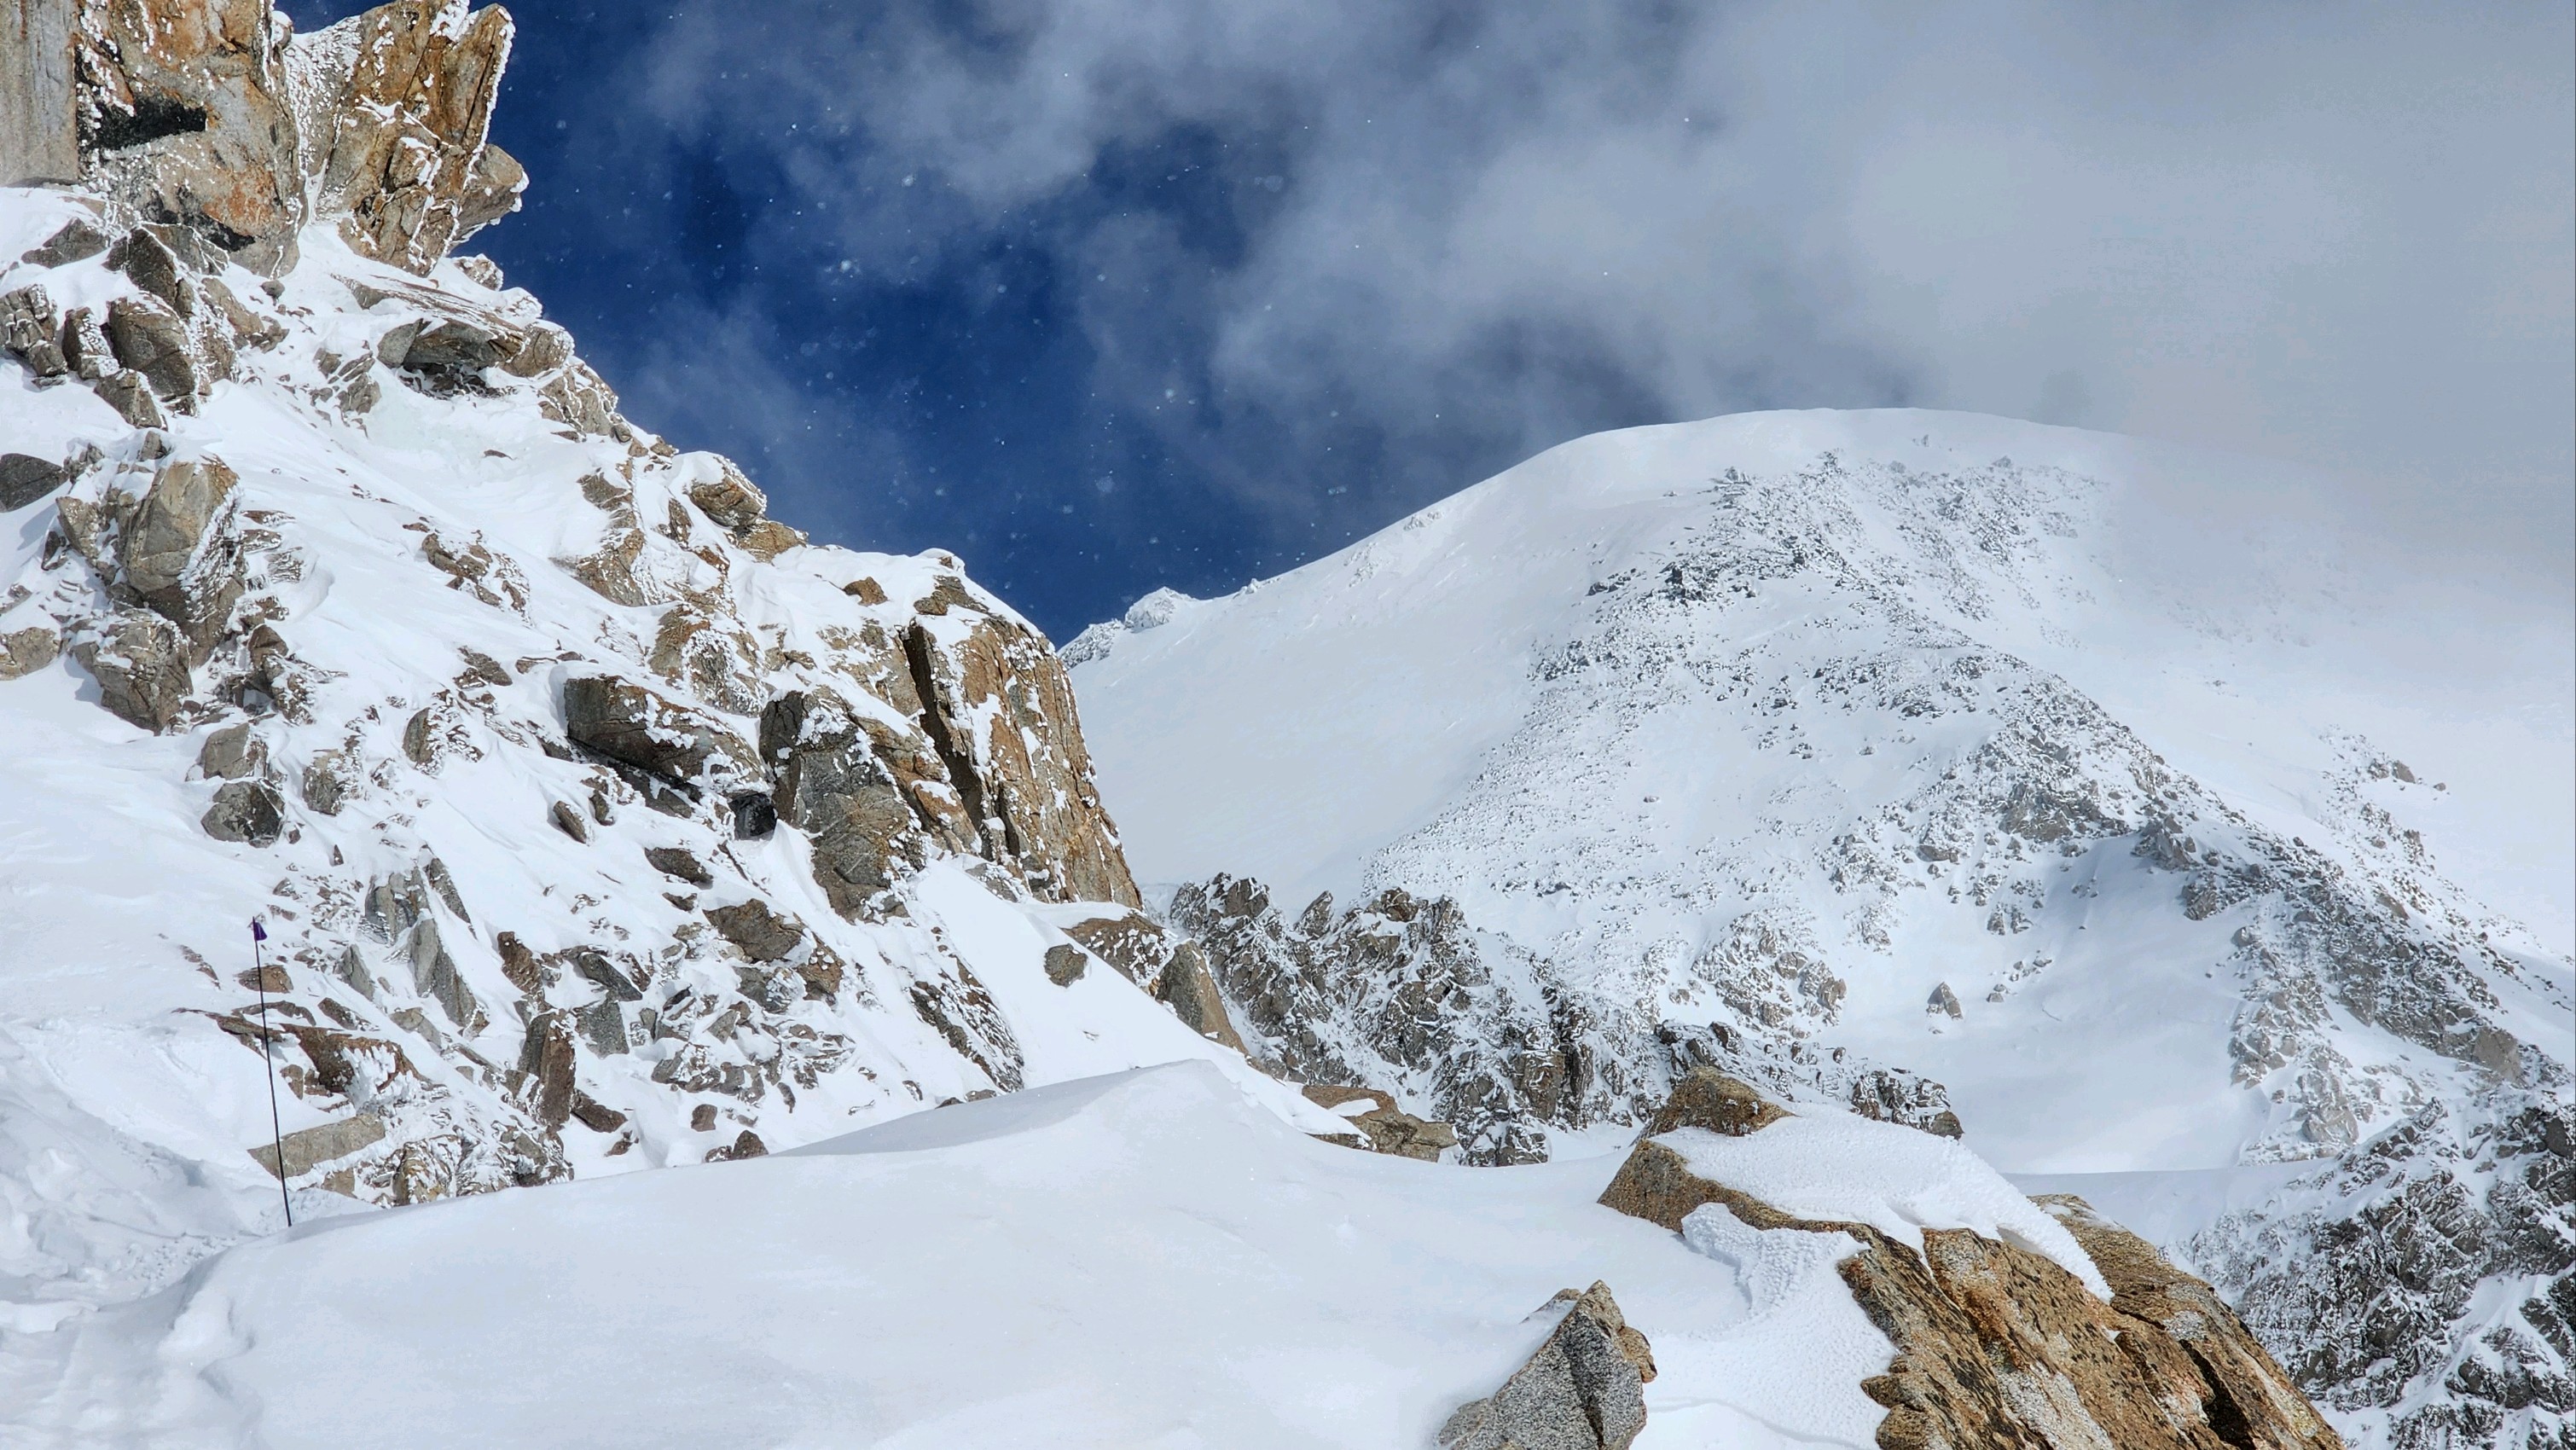 View of snow and rock ridge with a single flagged wand visible